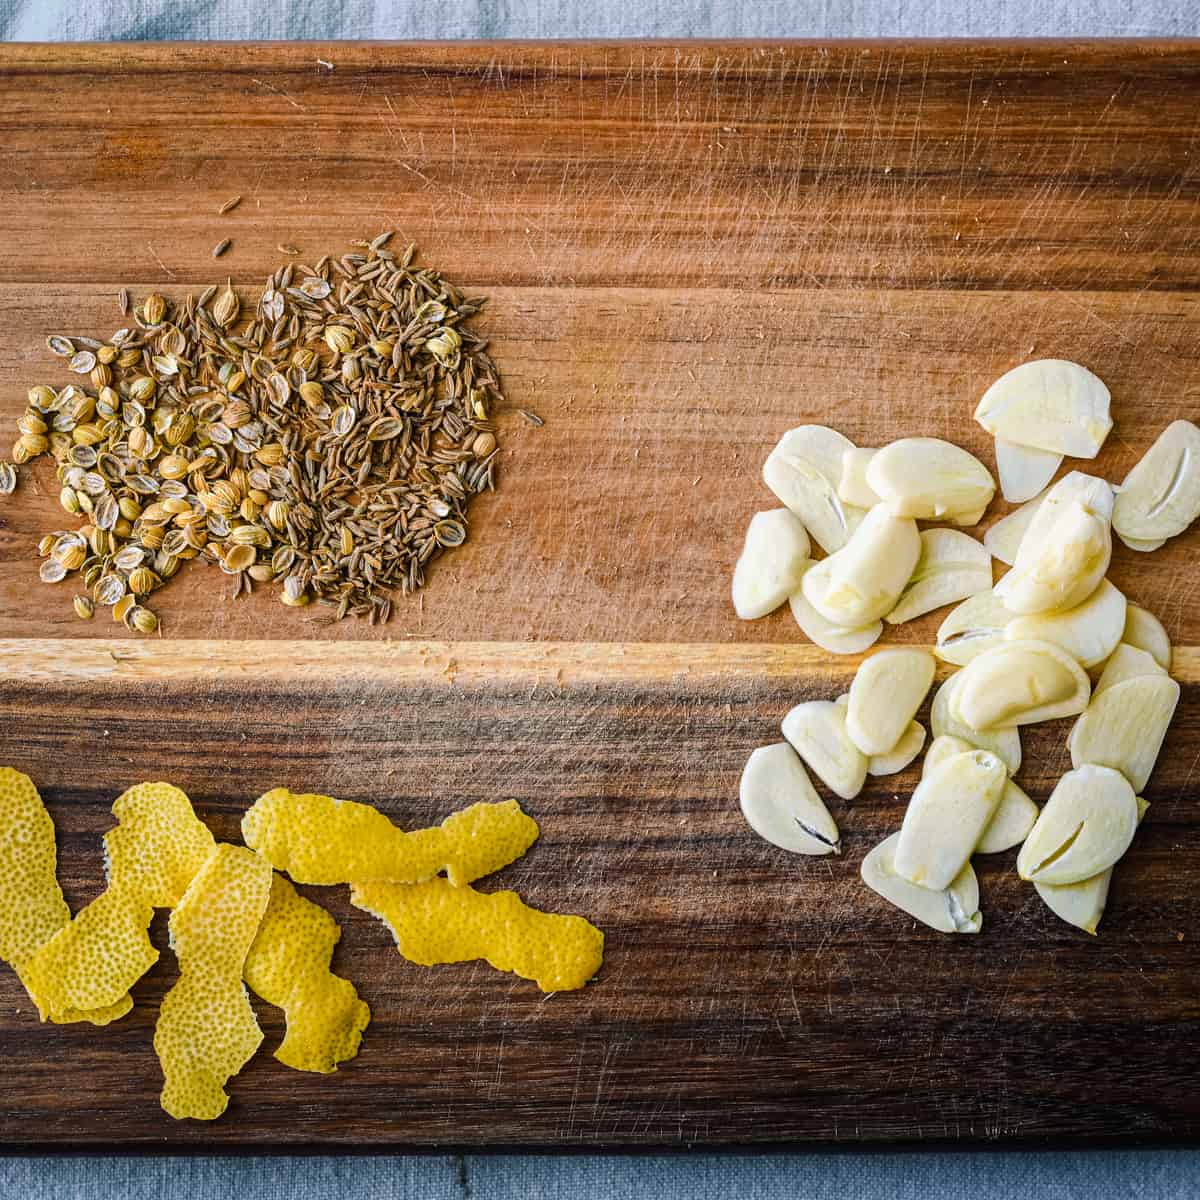 lemon peel, sliced garlic, and crushed spices on cutting board